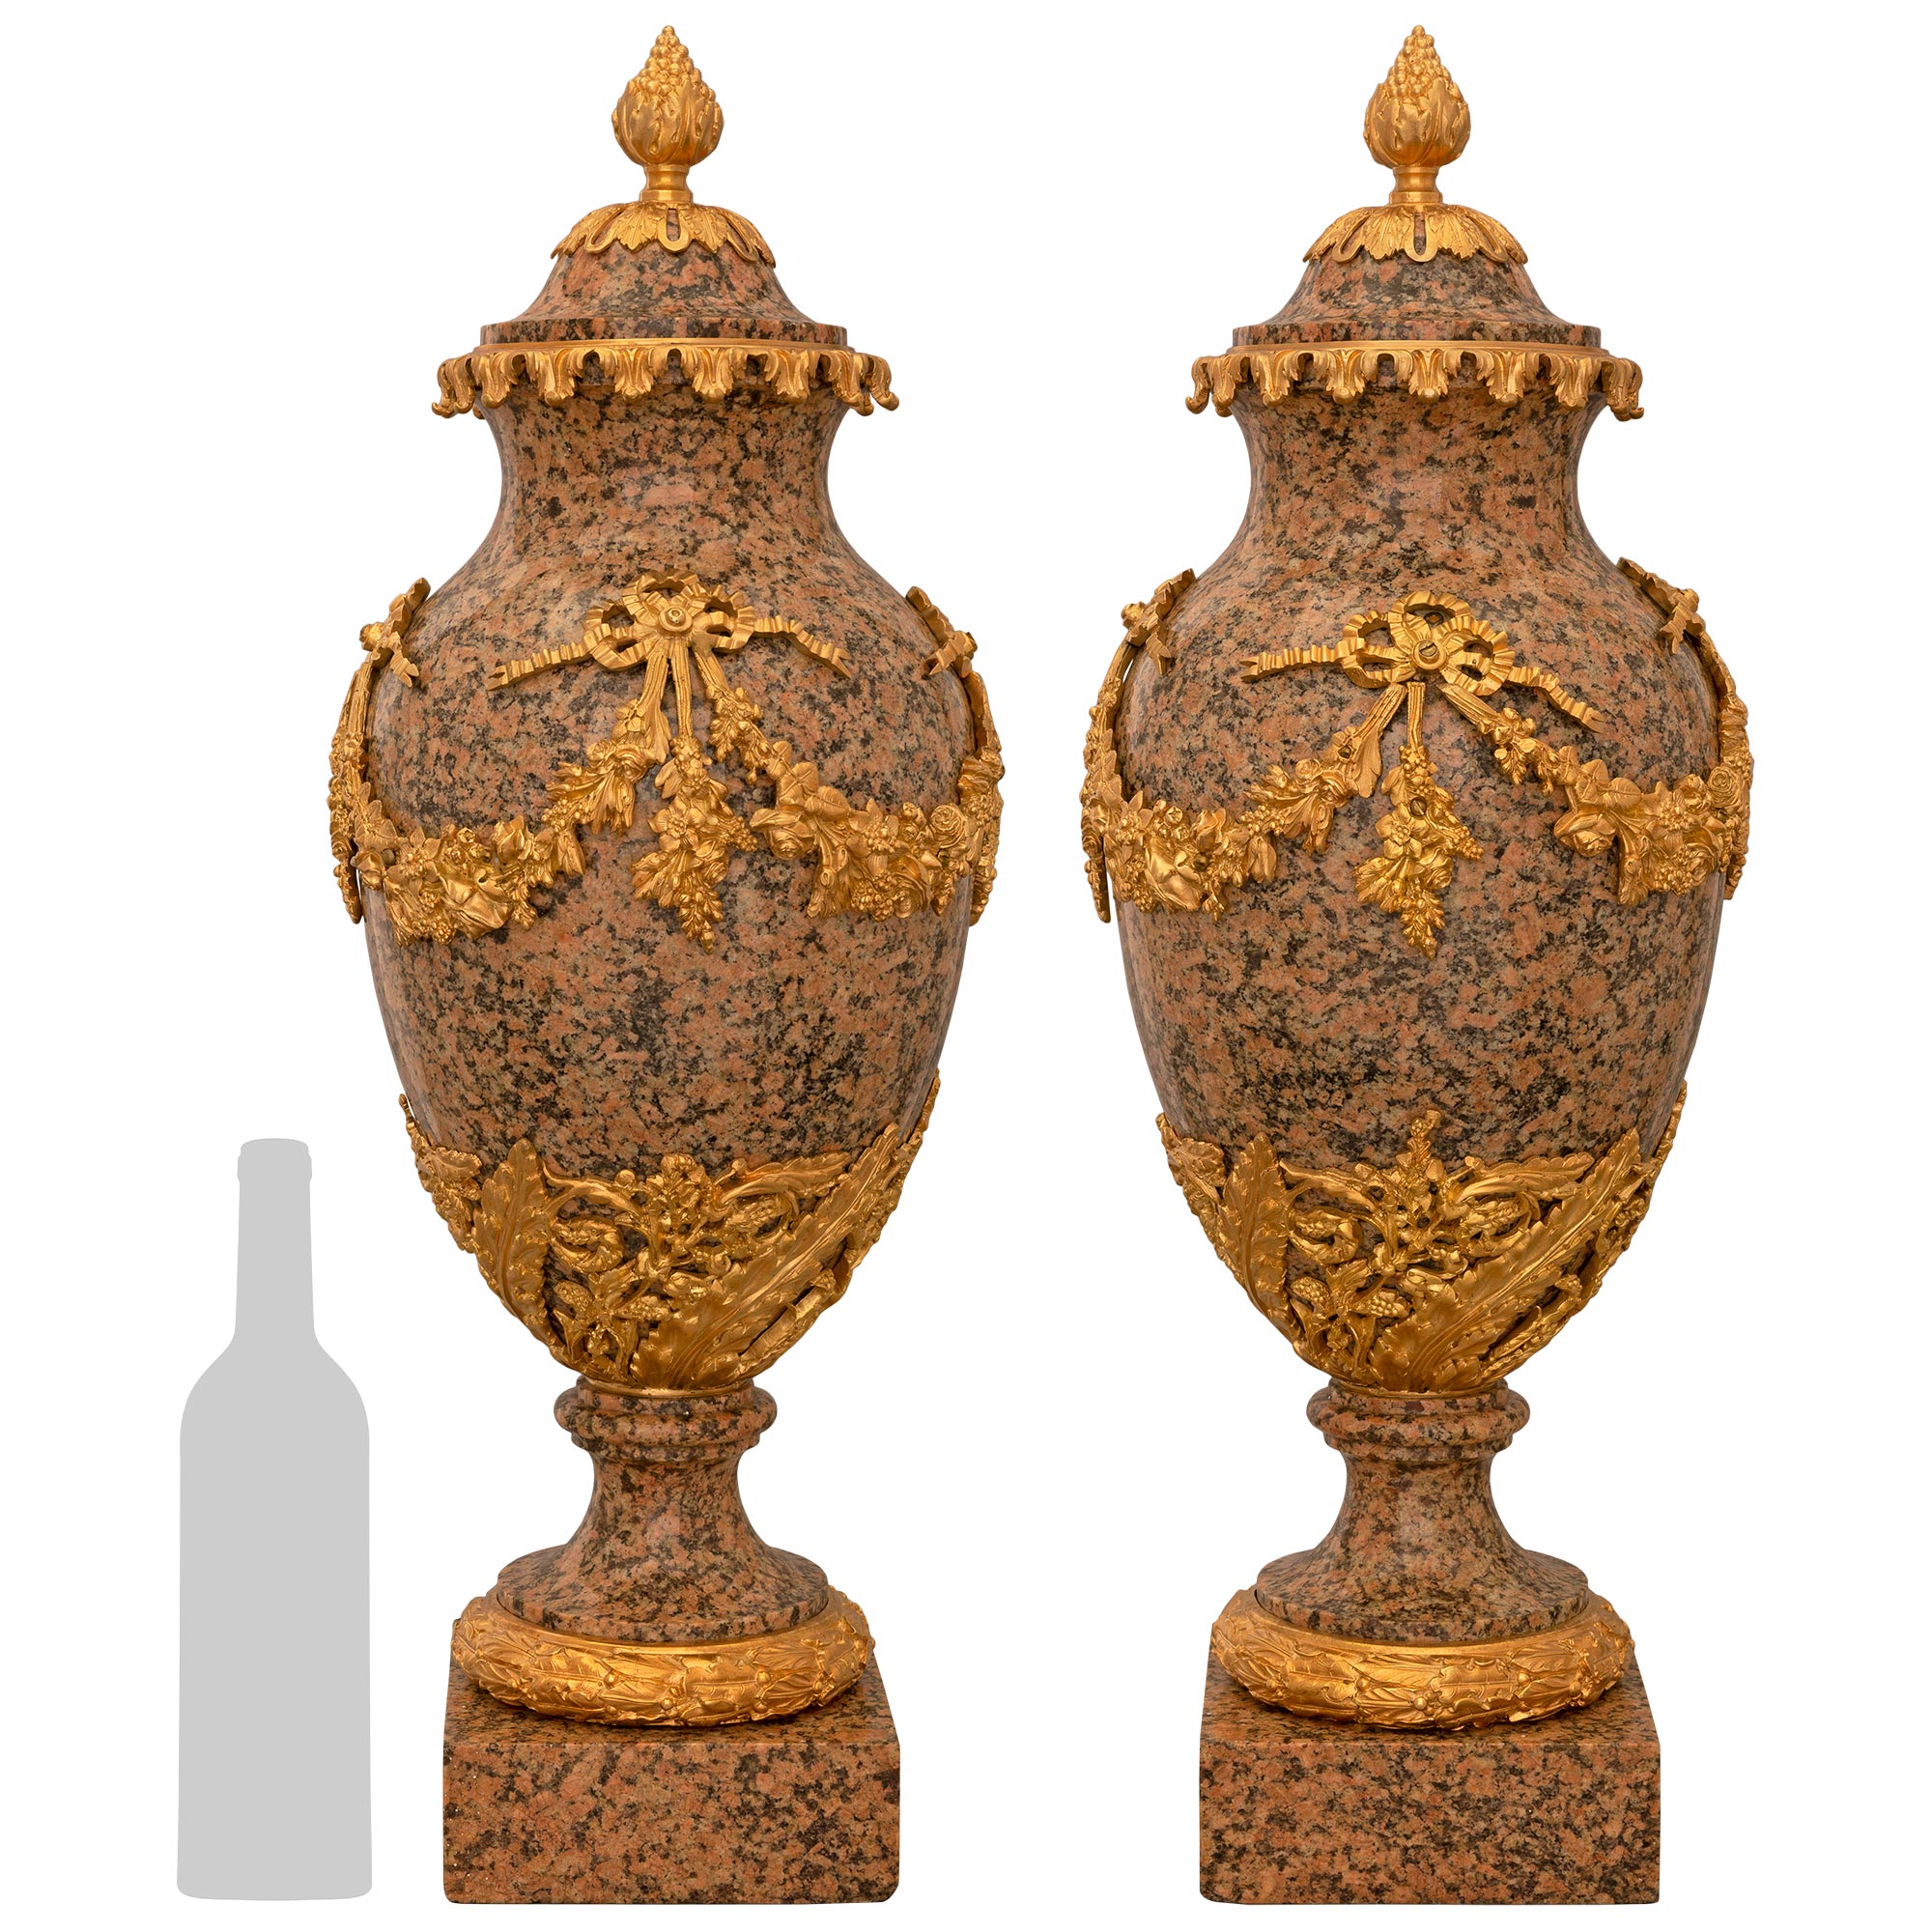 Pair of 19th Century Louis XVI Style Granite and Ormolu-Mounted Lidded Urns For Sale